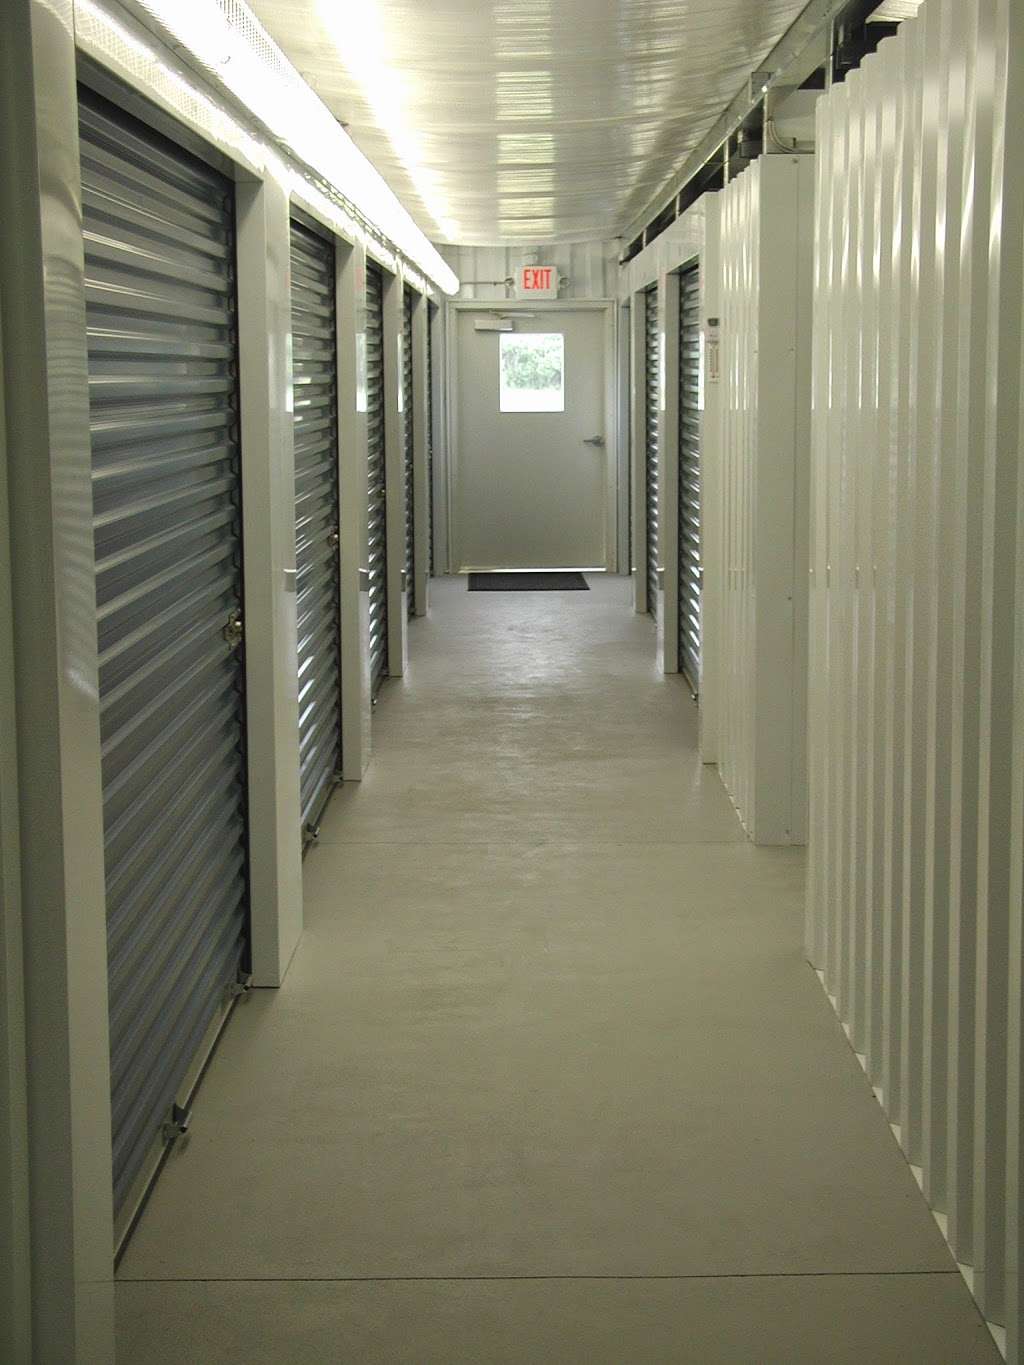 Cape Self Storage | 23 Oyster Rd, Cape May Court House, NJ 08210, USA | Phone: (609) 465-7895